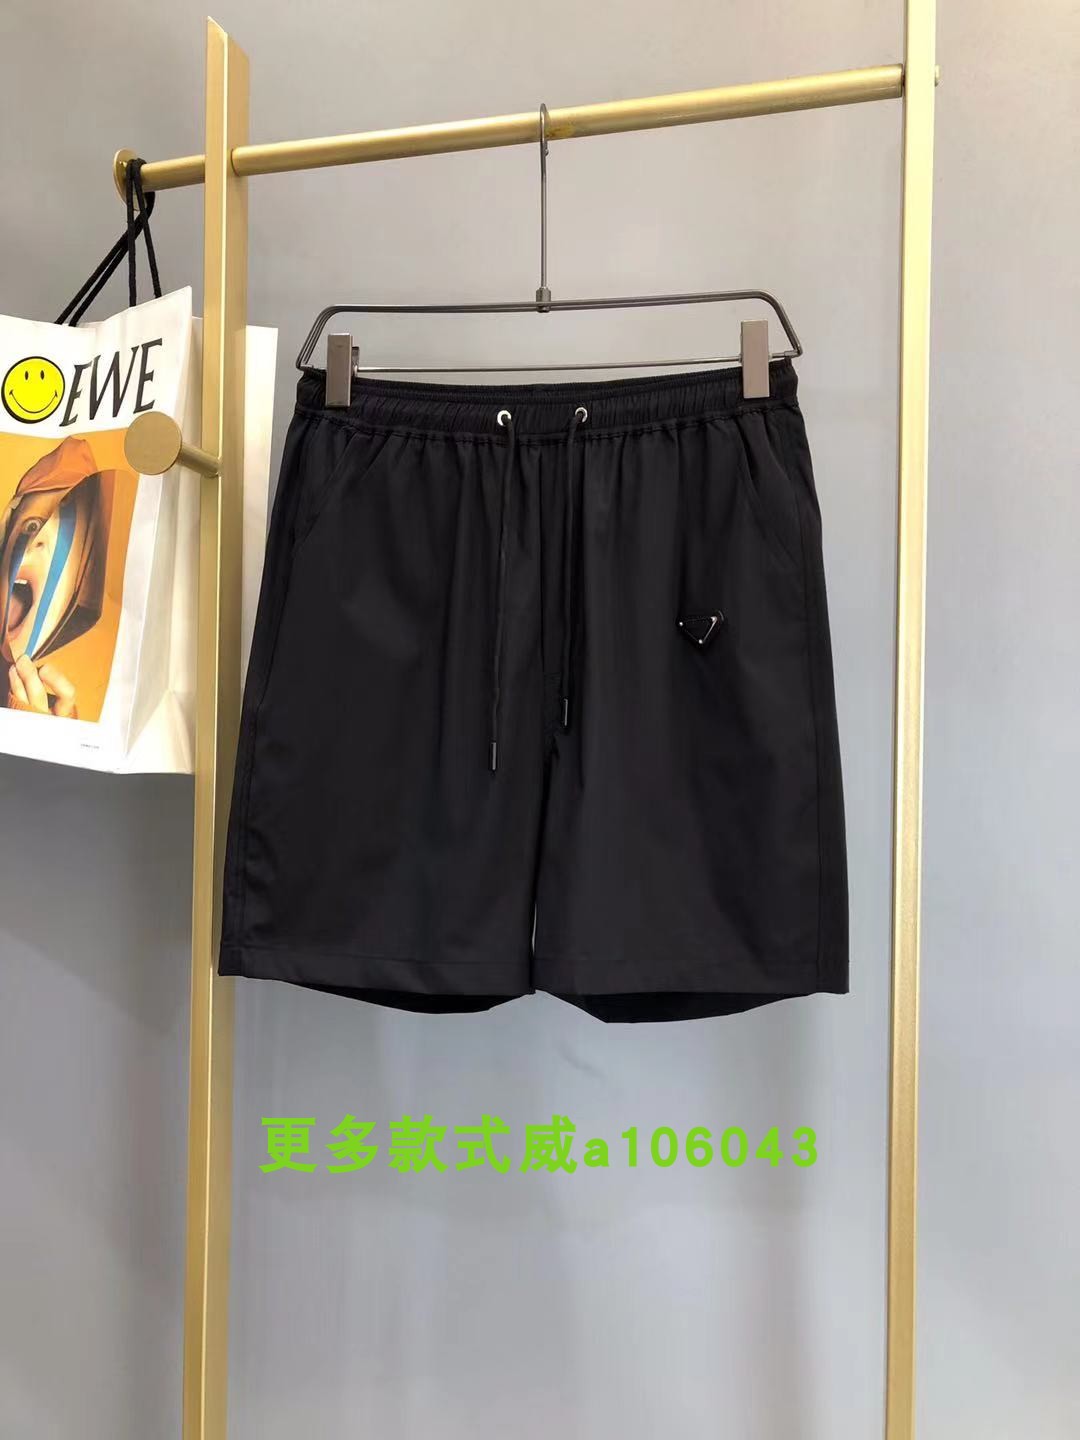 BlackLove horse  Official product Chaopai 21 summer new pattern Red label Velcro man leisure time shorts Quick drying pants Beach pants